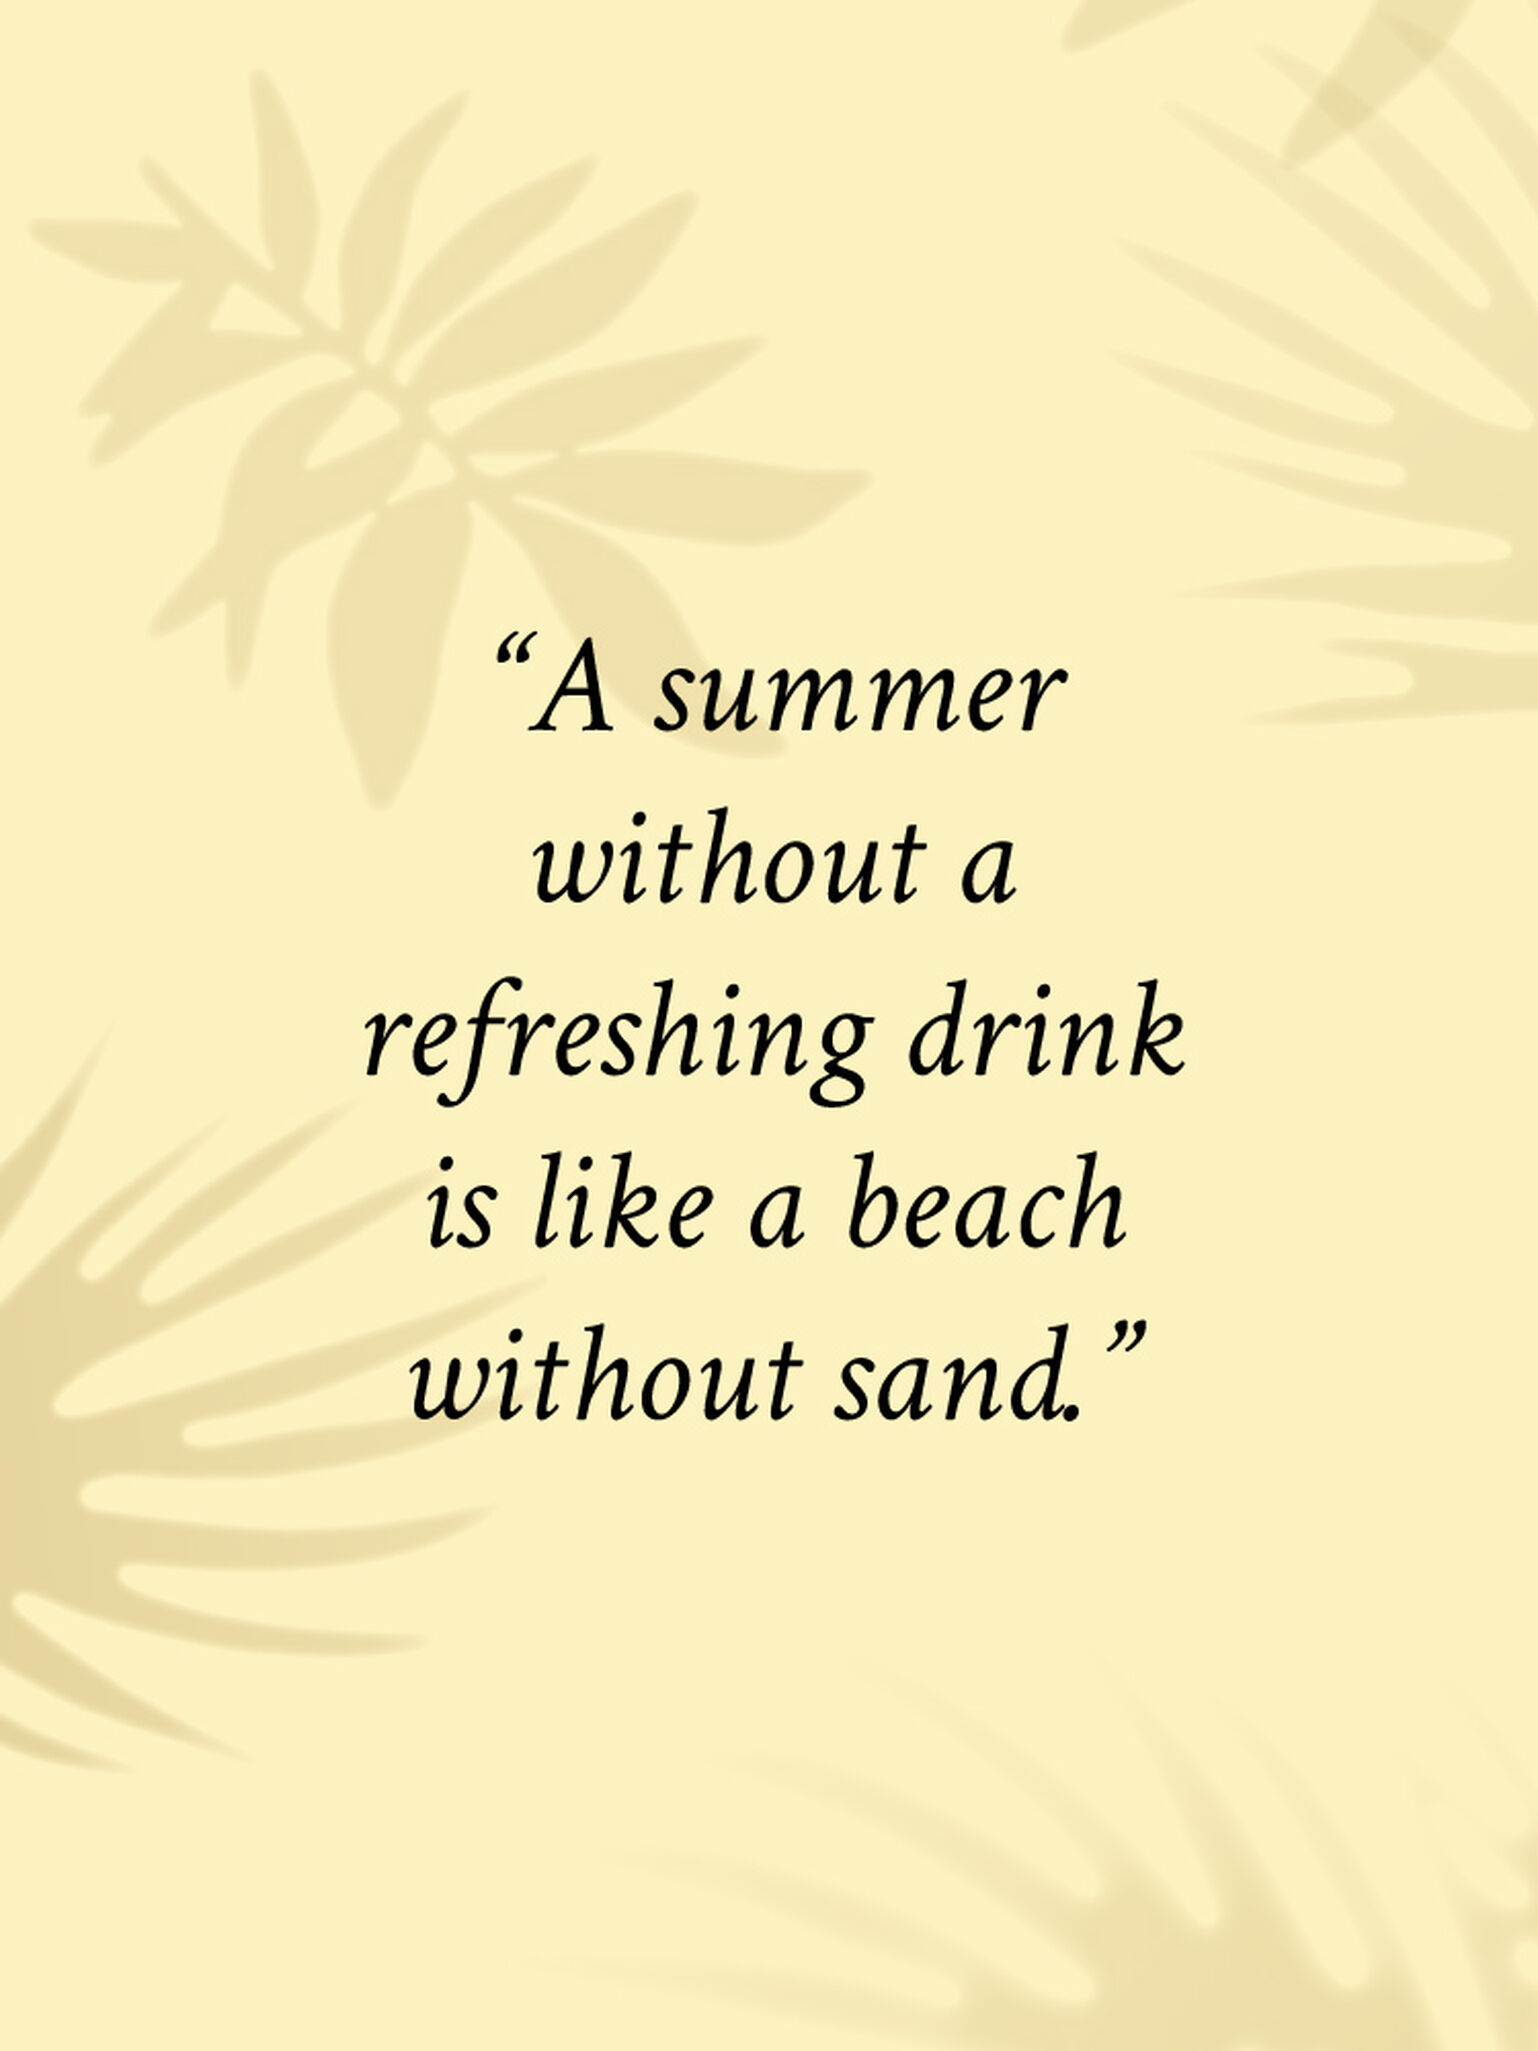 Summer without a refreshing drink is like a beach without sand quote on pale yellow background with palm silhouettes